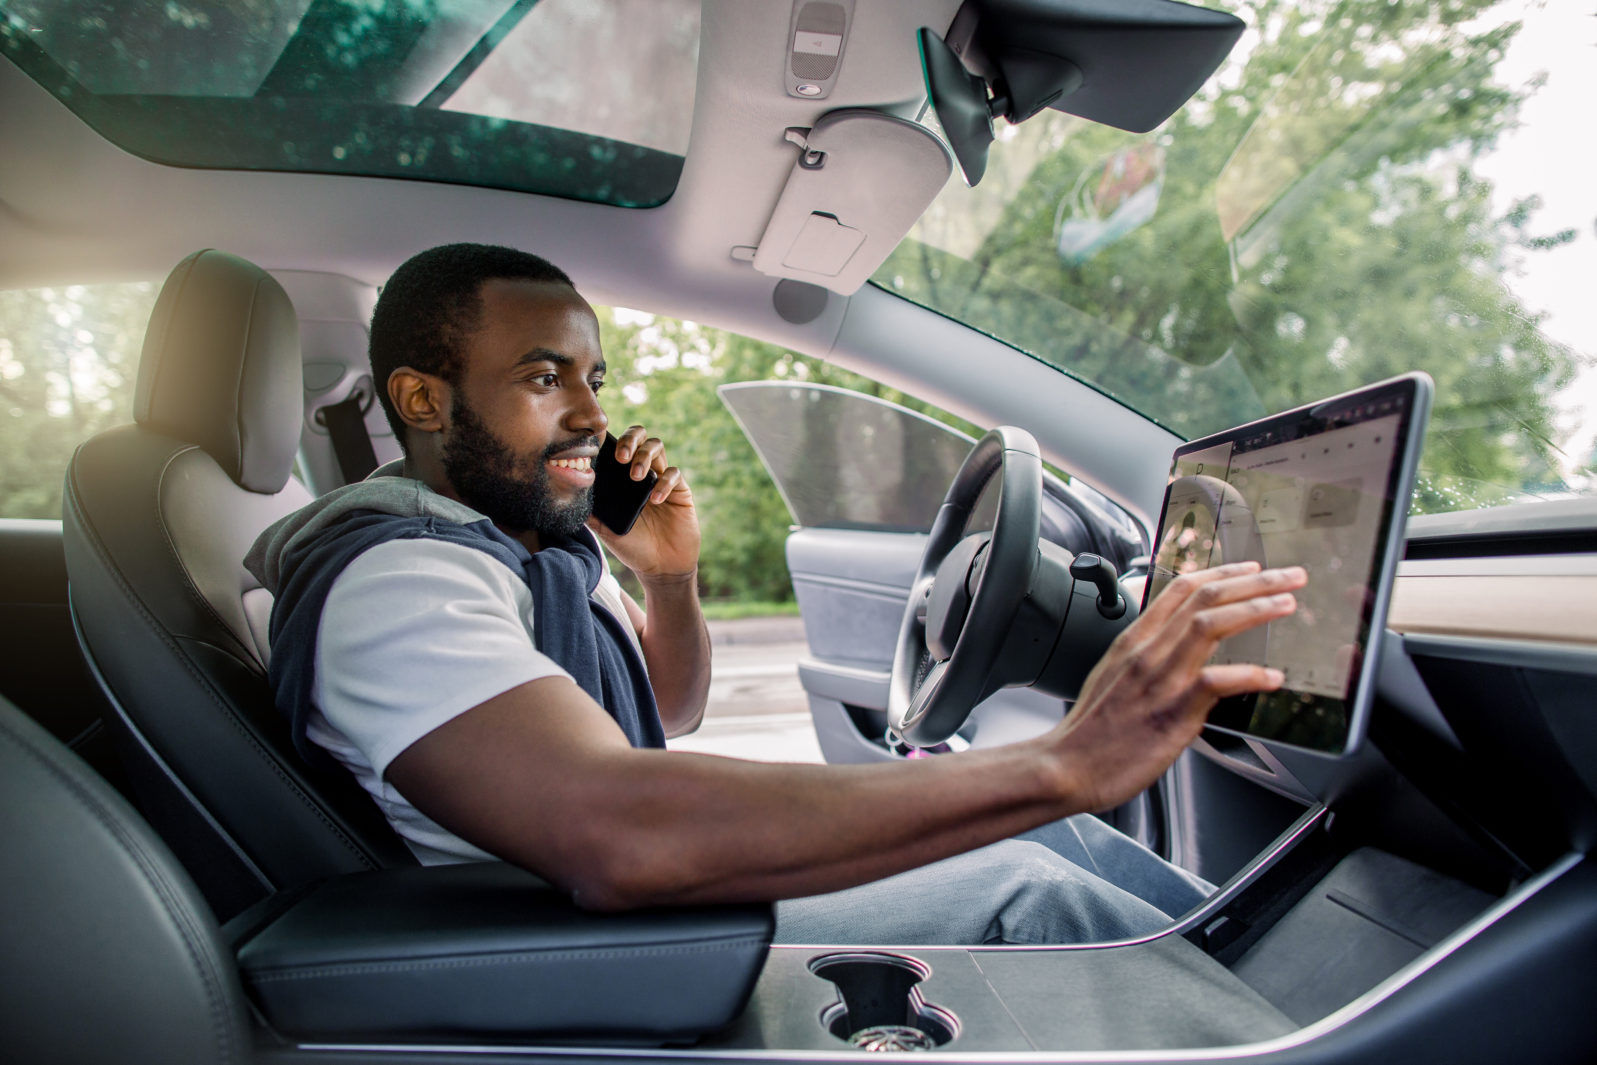 Handsome bearded African man touches the touchscreen in his new high-tech electric vehicle while while talking by phone and smiling. Self driving vehicle concept